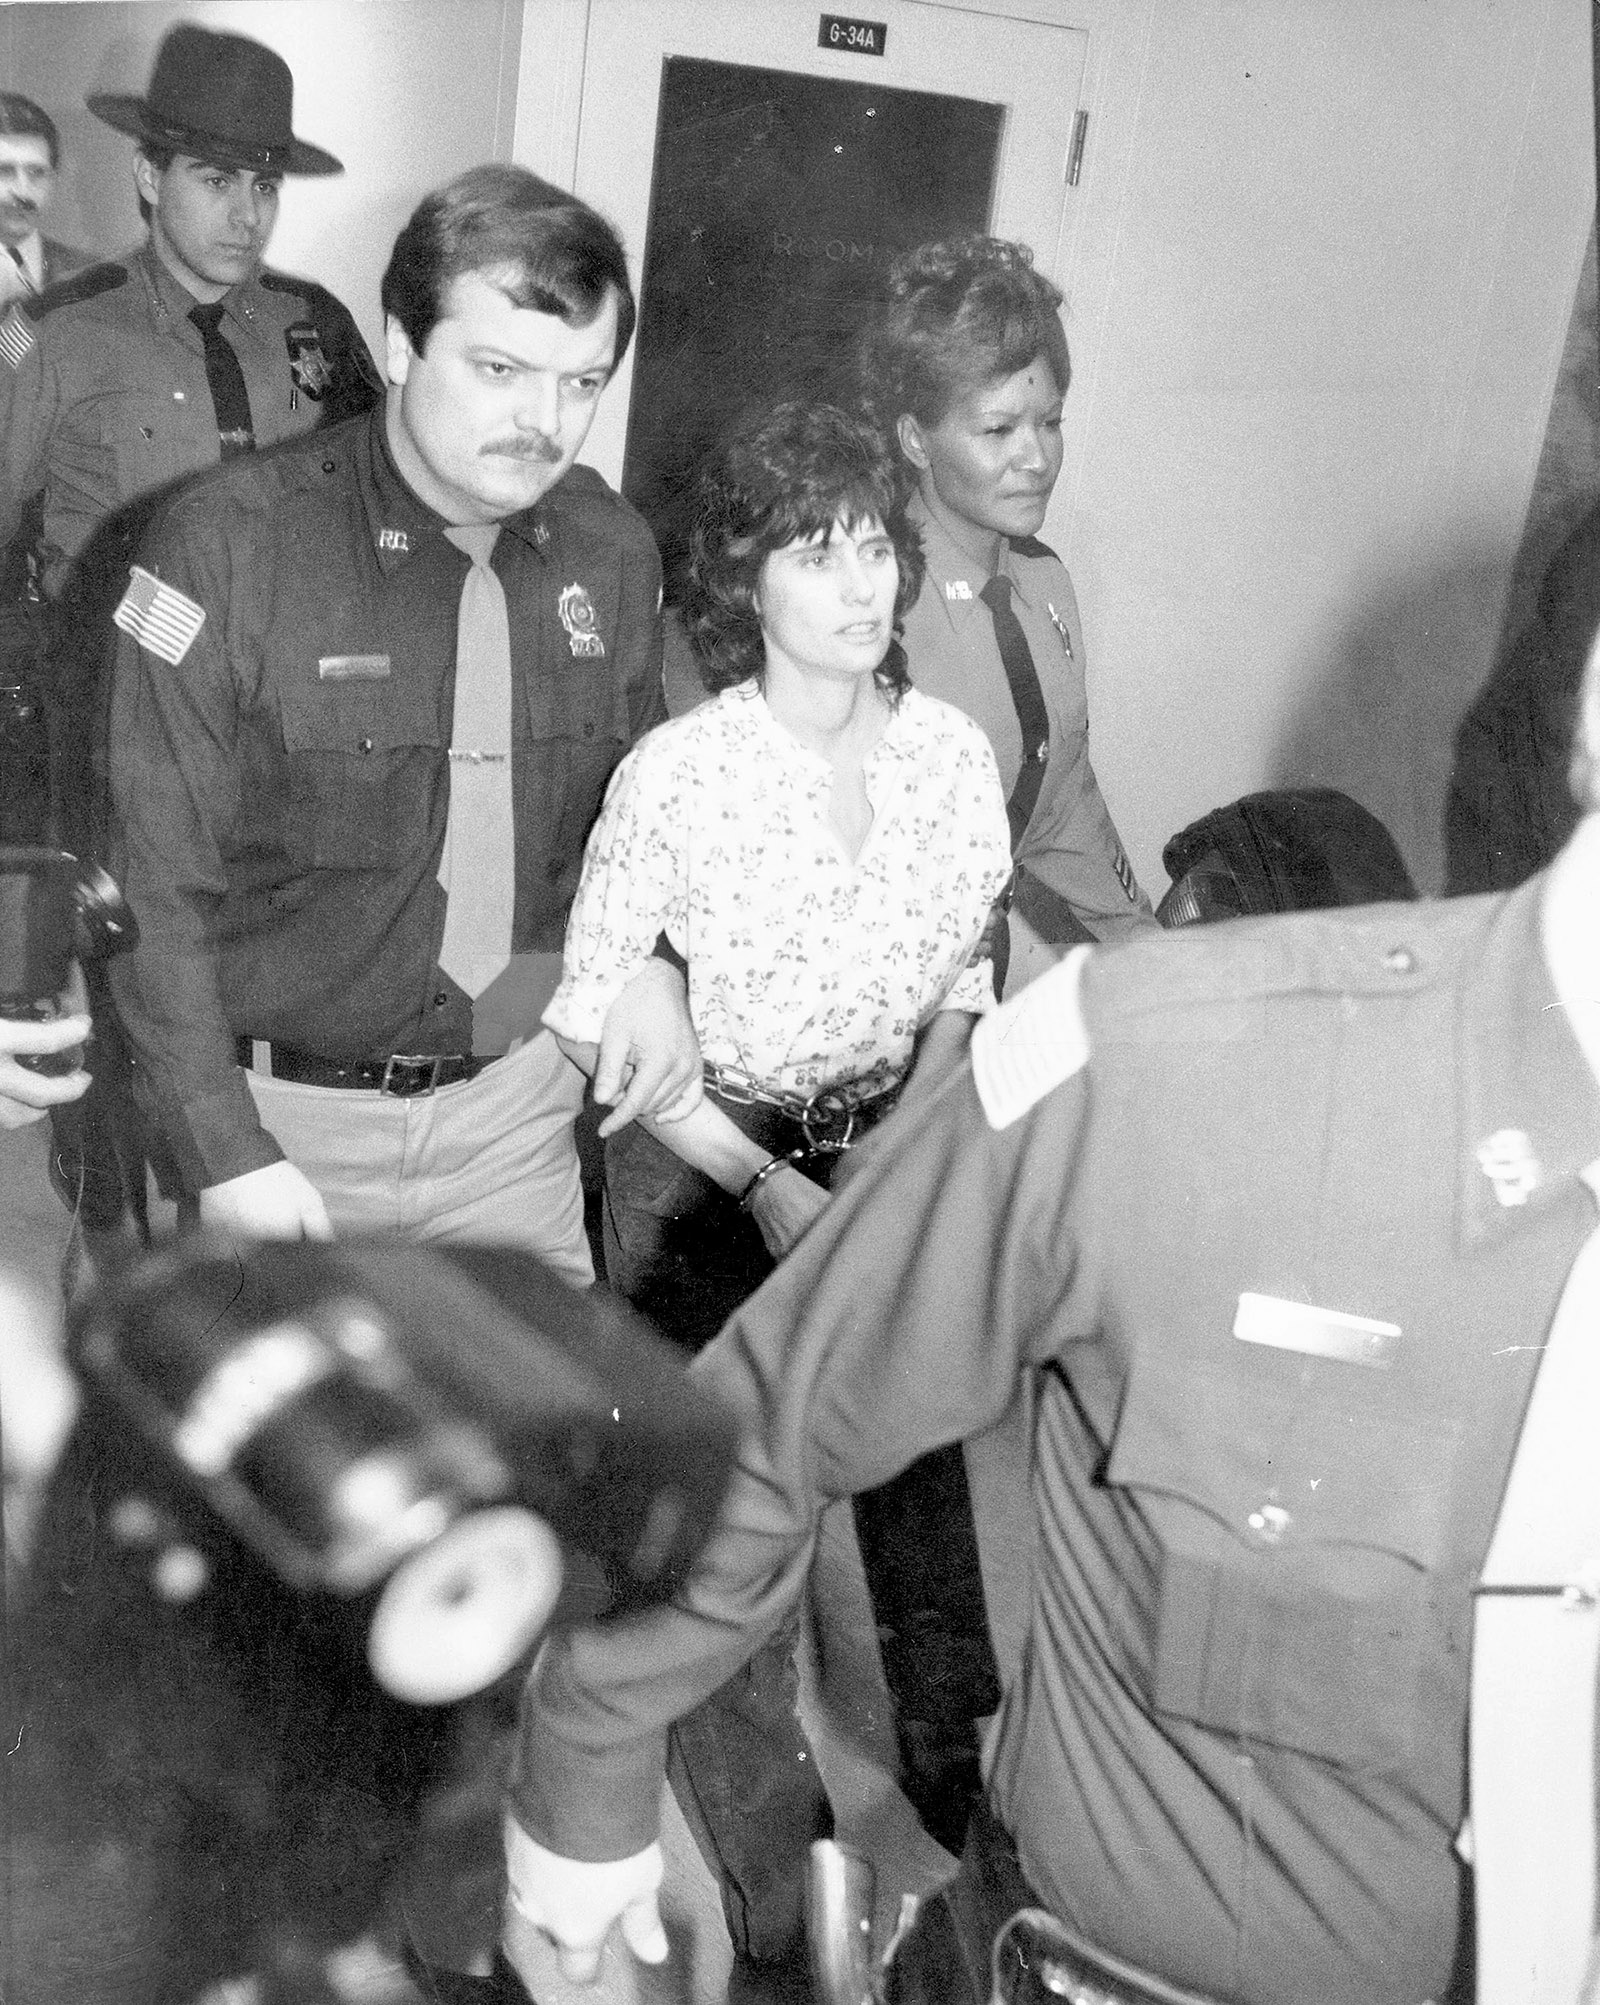 Kathy Boudin at an arraignment for her involvement in an armed robbery and shootout by members of the Black Liberation Army, New City, New York, 1981